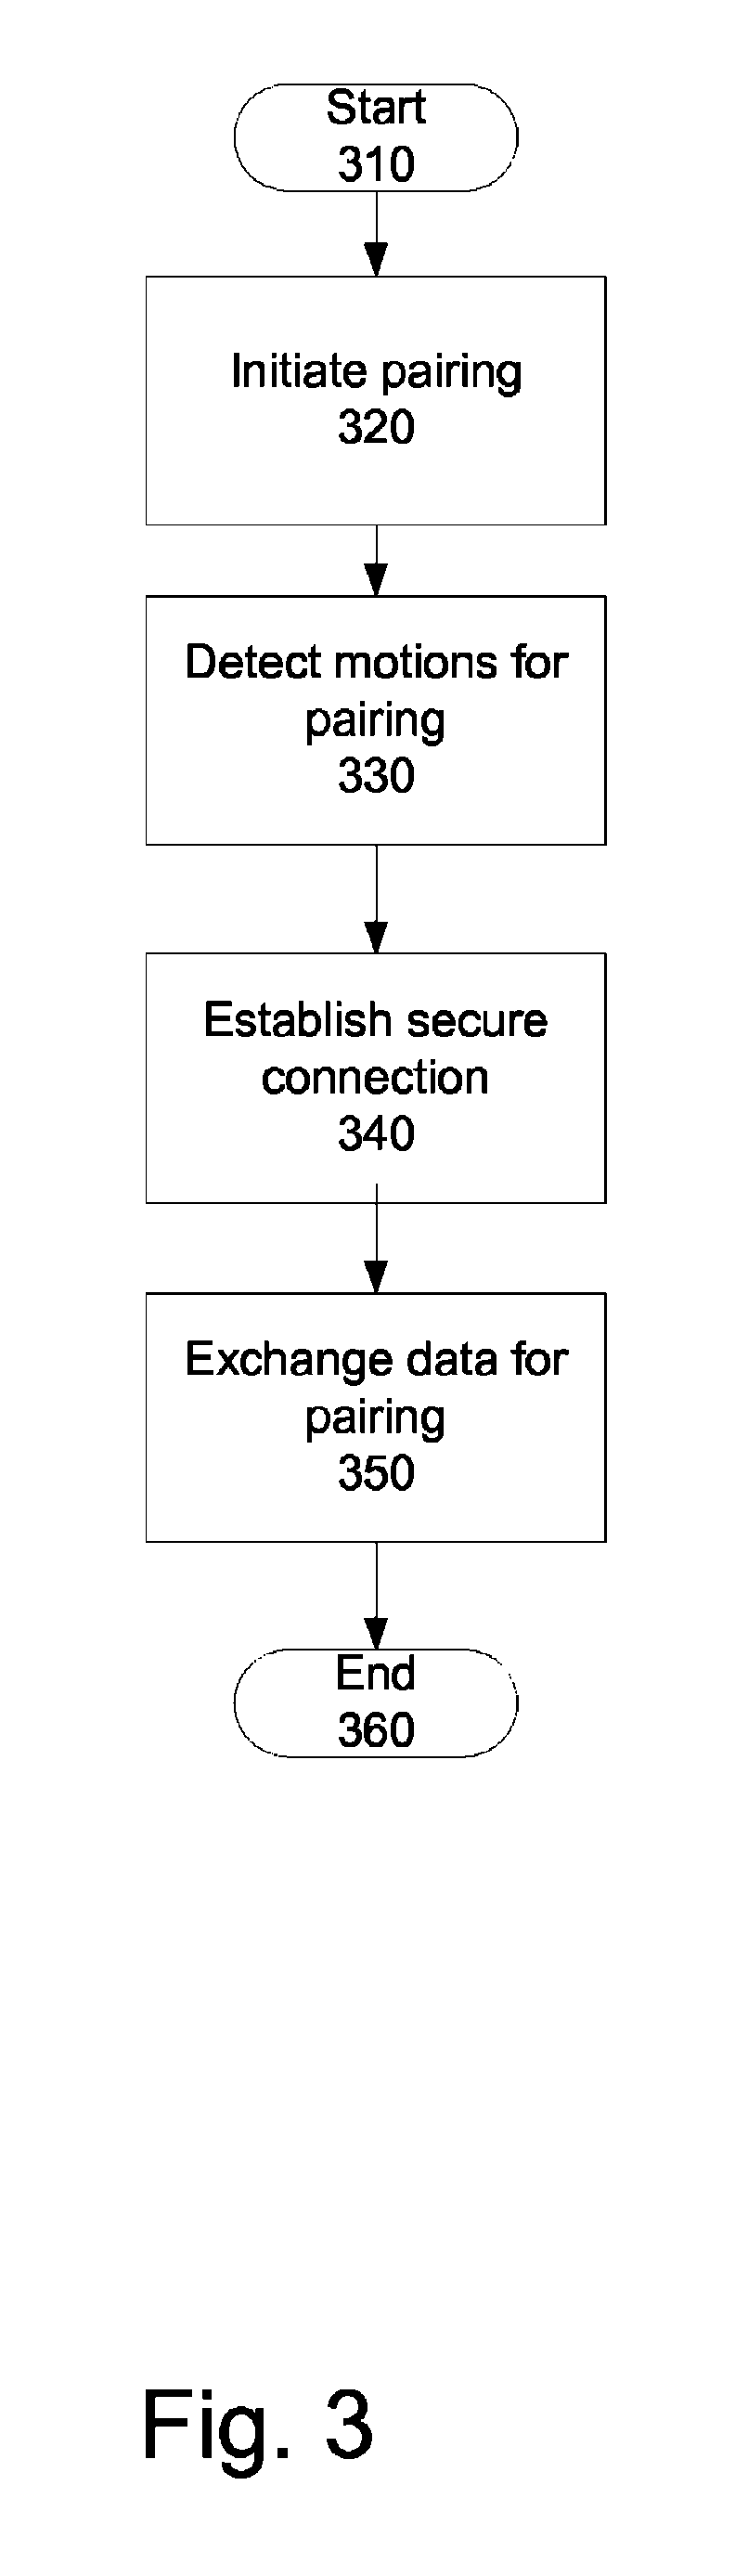 Method and apparatus to enable pairing of devices